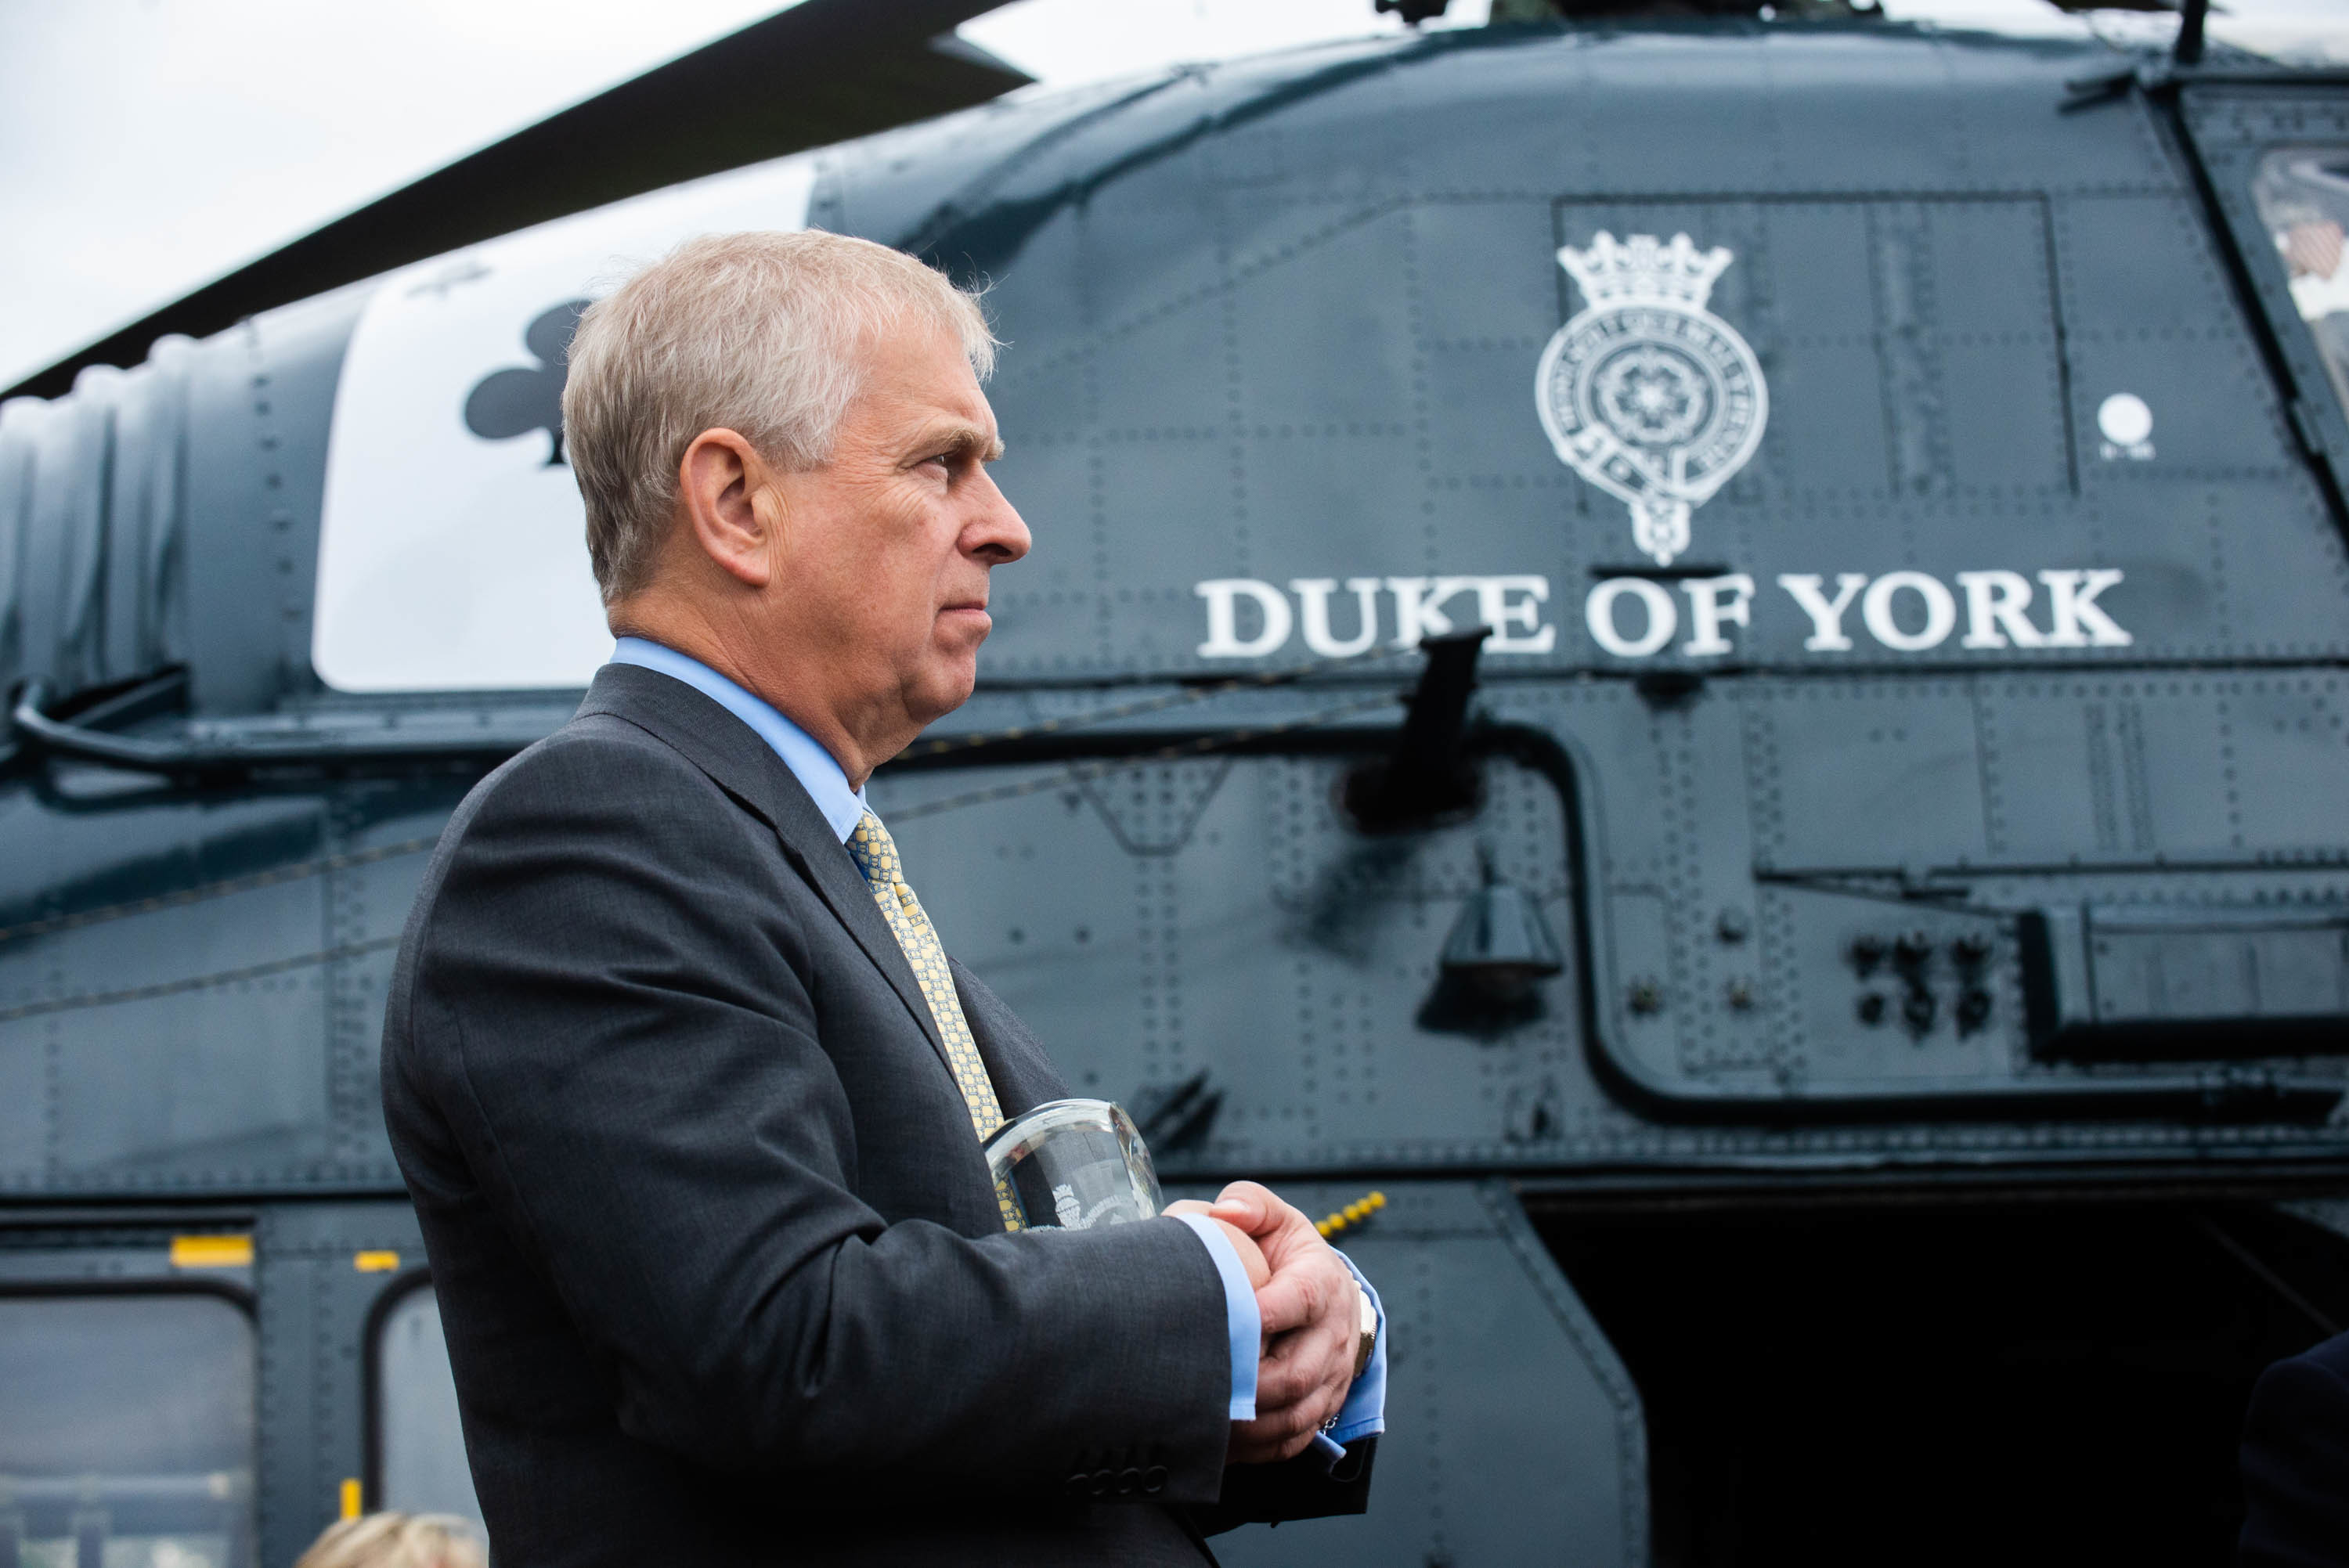 Prince Andrew visits Moryvia to present them with an award and name a helicopter.